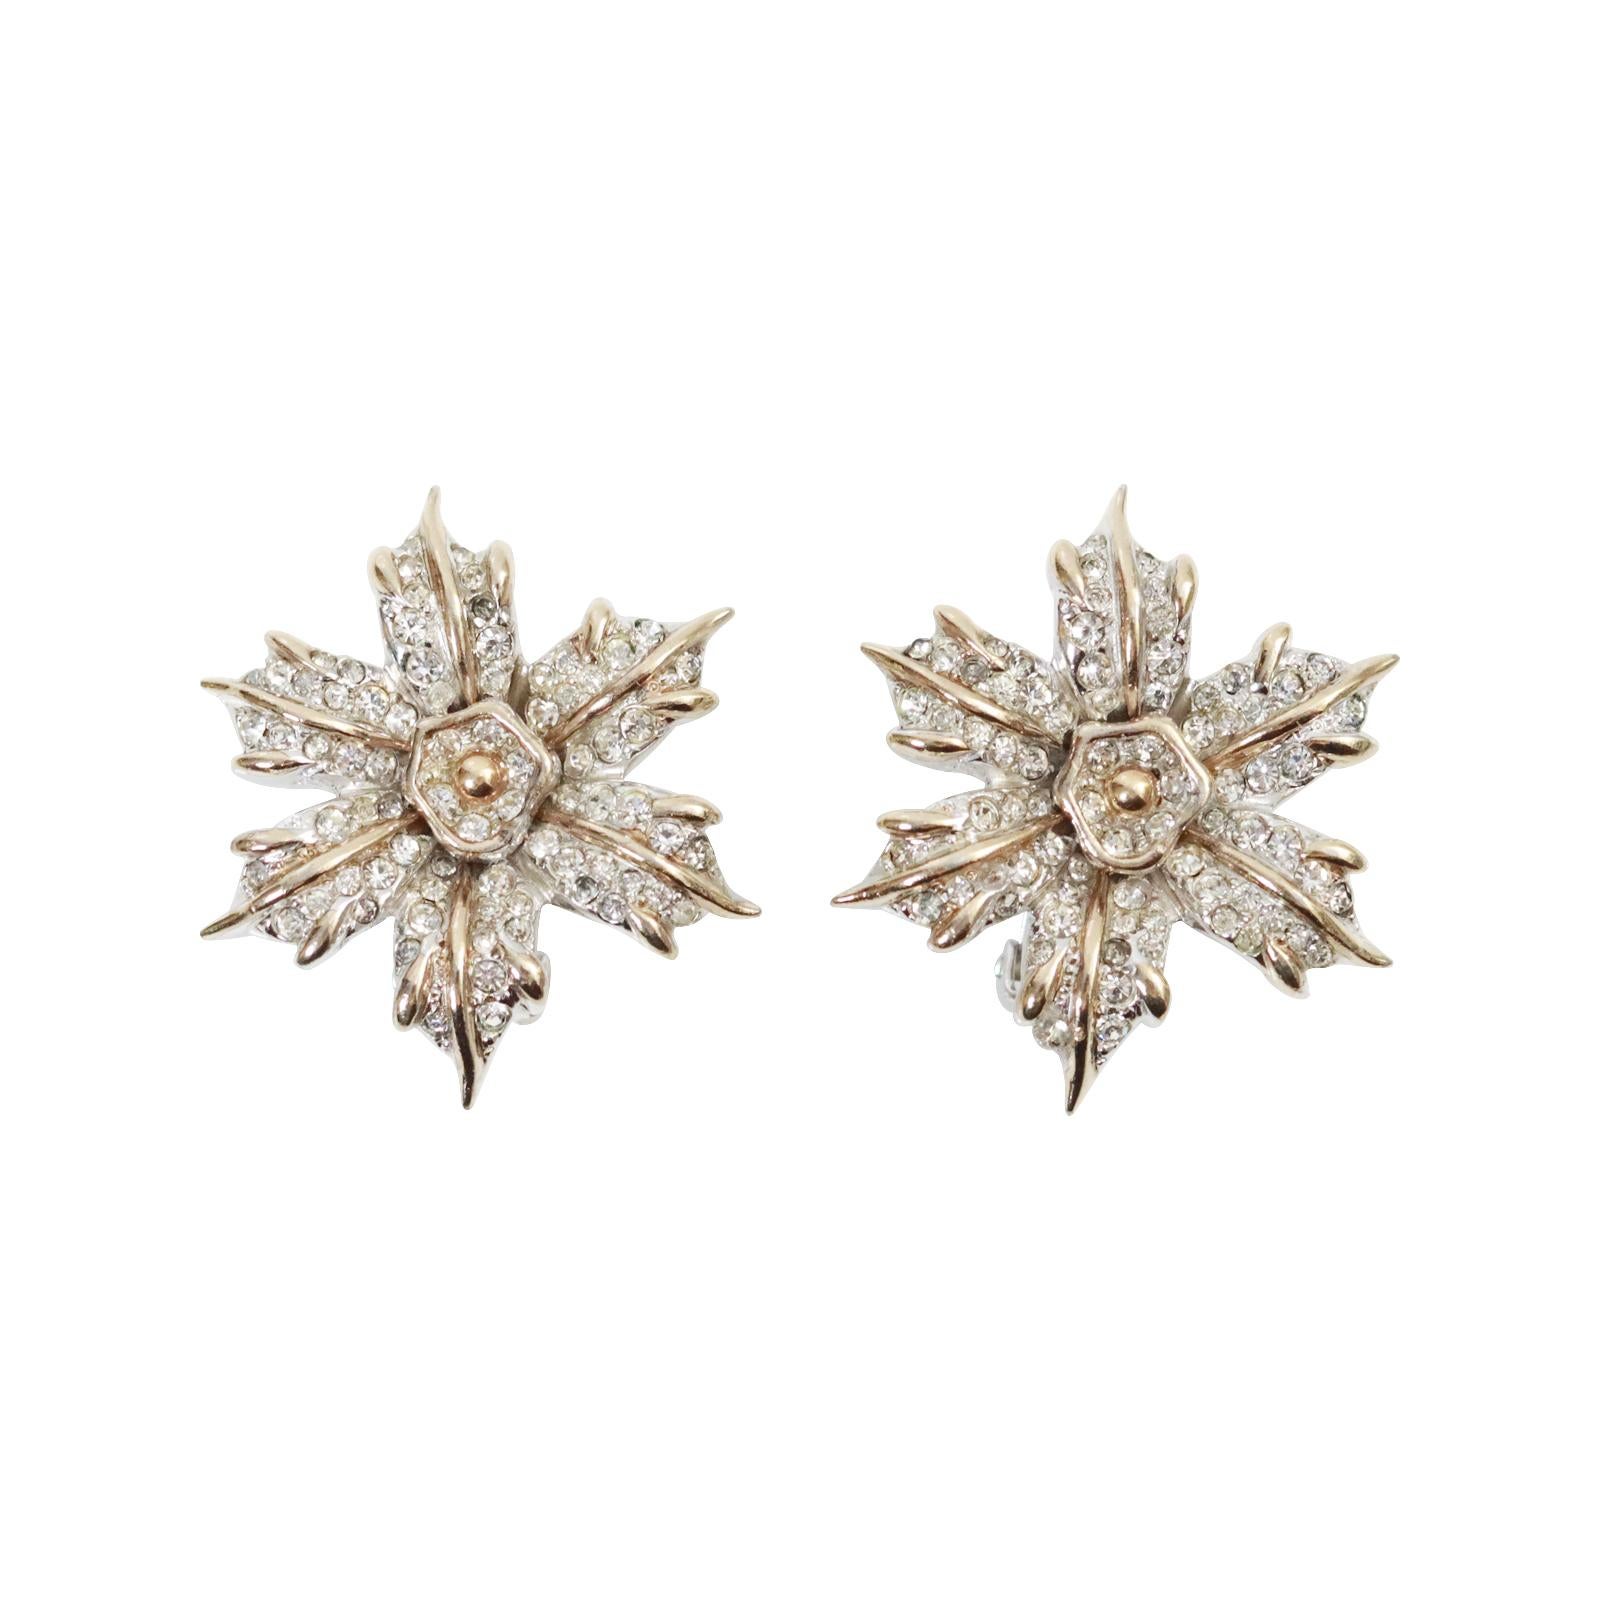 Vintage Halbe Silver and Gold Tone Diamante Flower Earrings, Circa 1960's.  Halbe is a beautiful and old brand that have very few pieces to be found.  These do look like fine jewelry and remind me of a Buccellati design. These are well made and